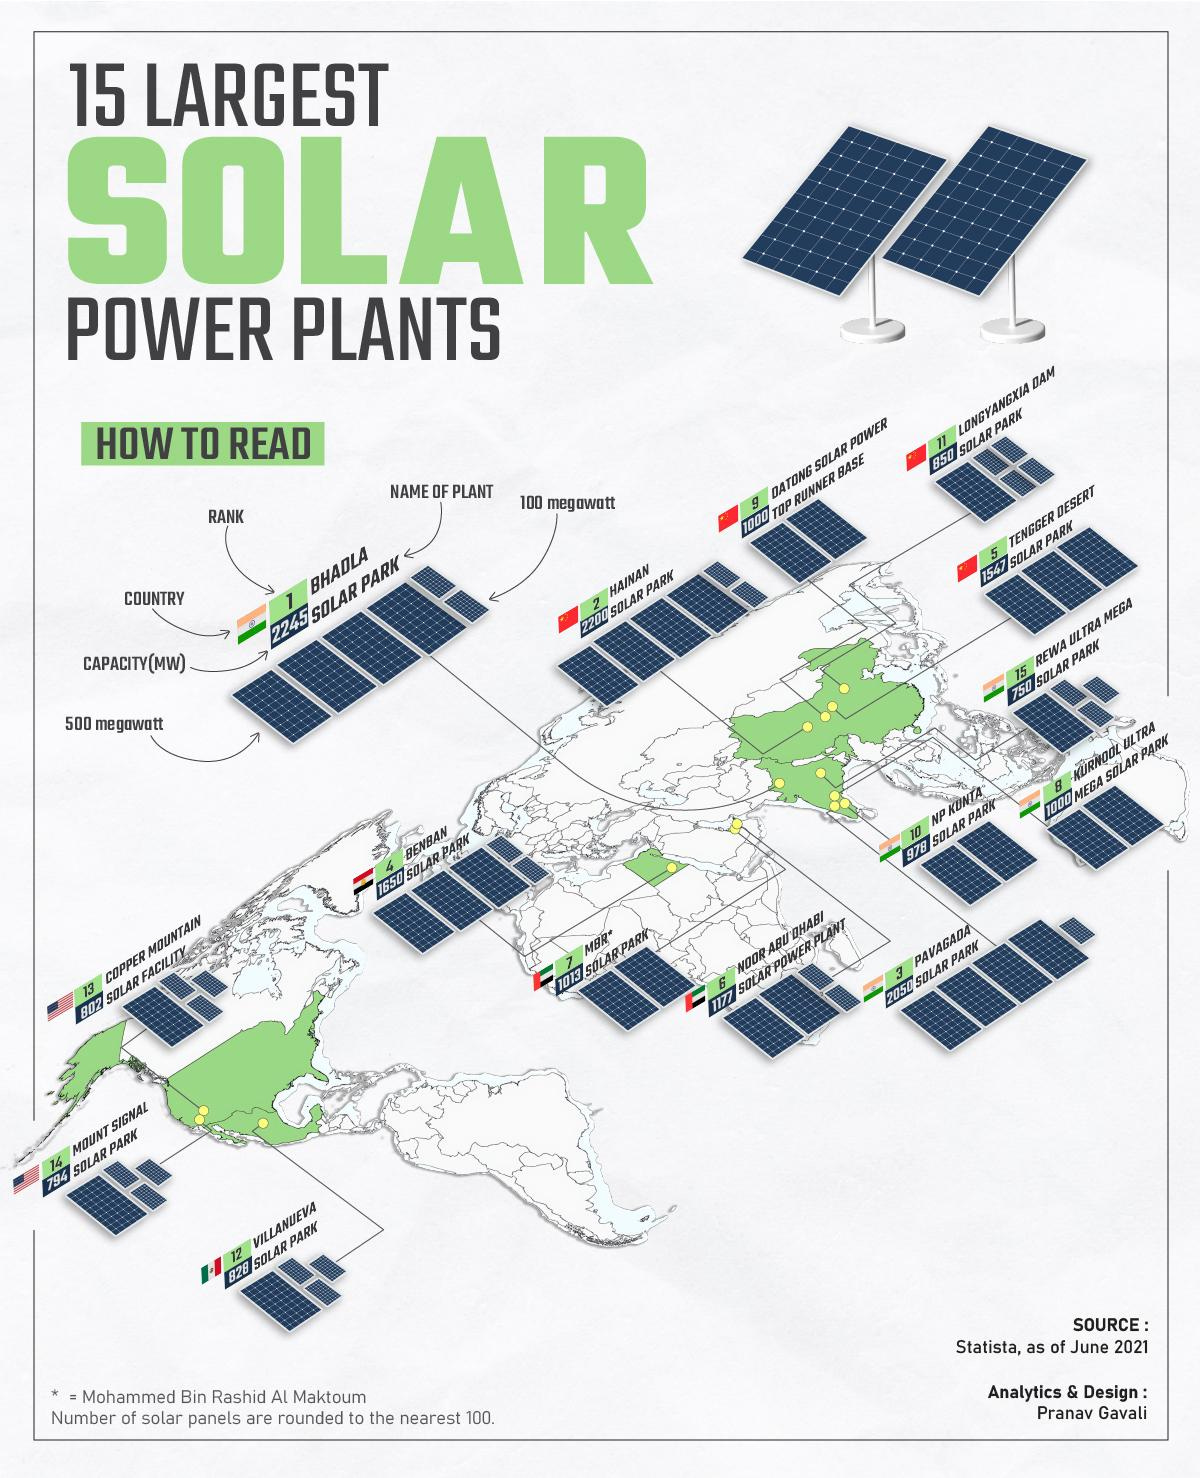 Where are the worlds largest Solar Power Plants?